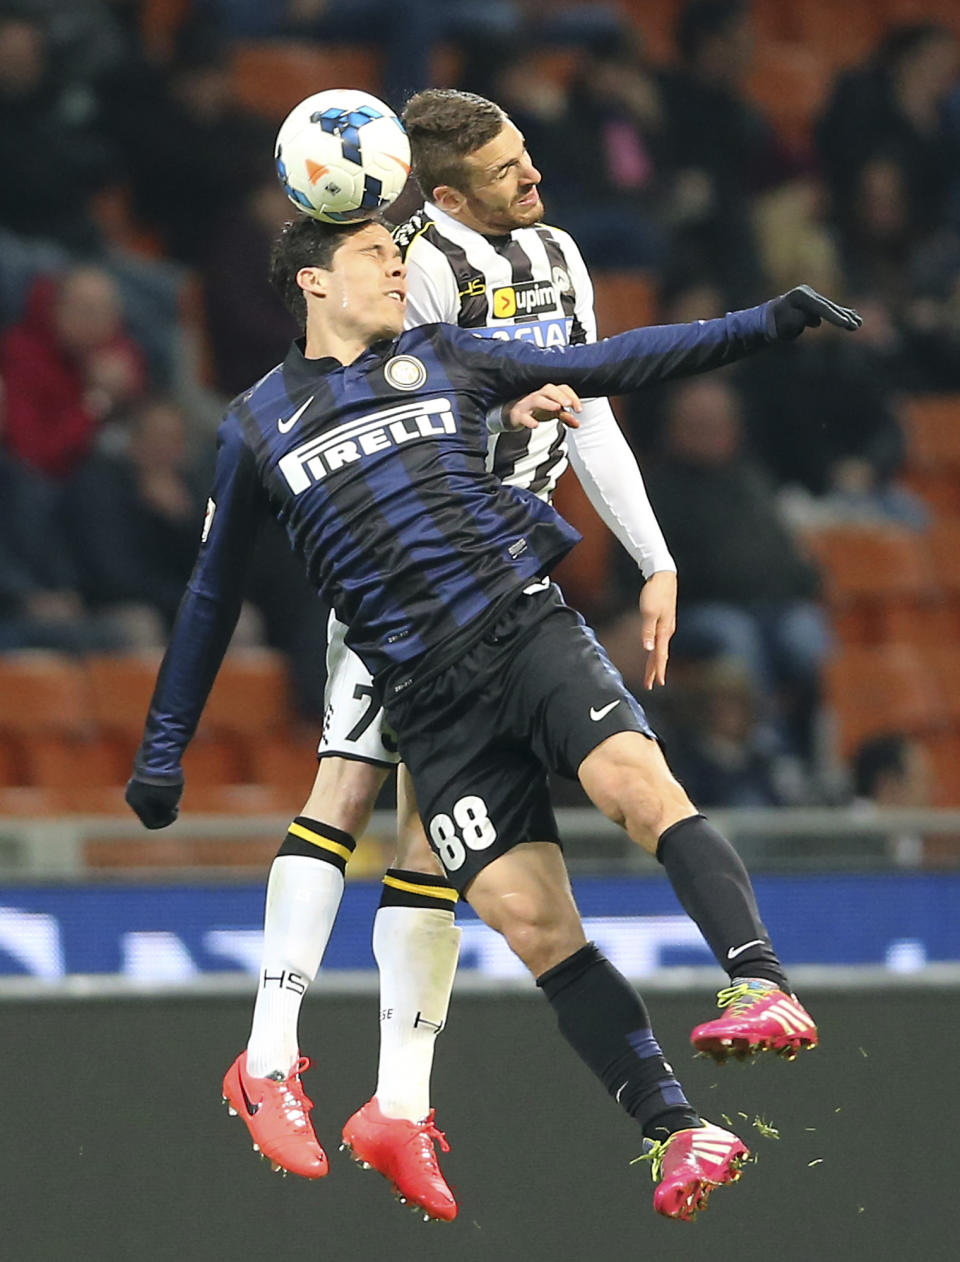 Inter Milan Brazilian midfielder Anderson Hernanes, left, jumps for the ball with Udinese defender Silvan Widmer, of Switzerland, during the Serie A soccer match between Inter Milan and Udinese at the San Siro stadium in Milan, Italy, Thursday, March 27, 2014. (AP Photo/Antonio Calanni)